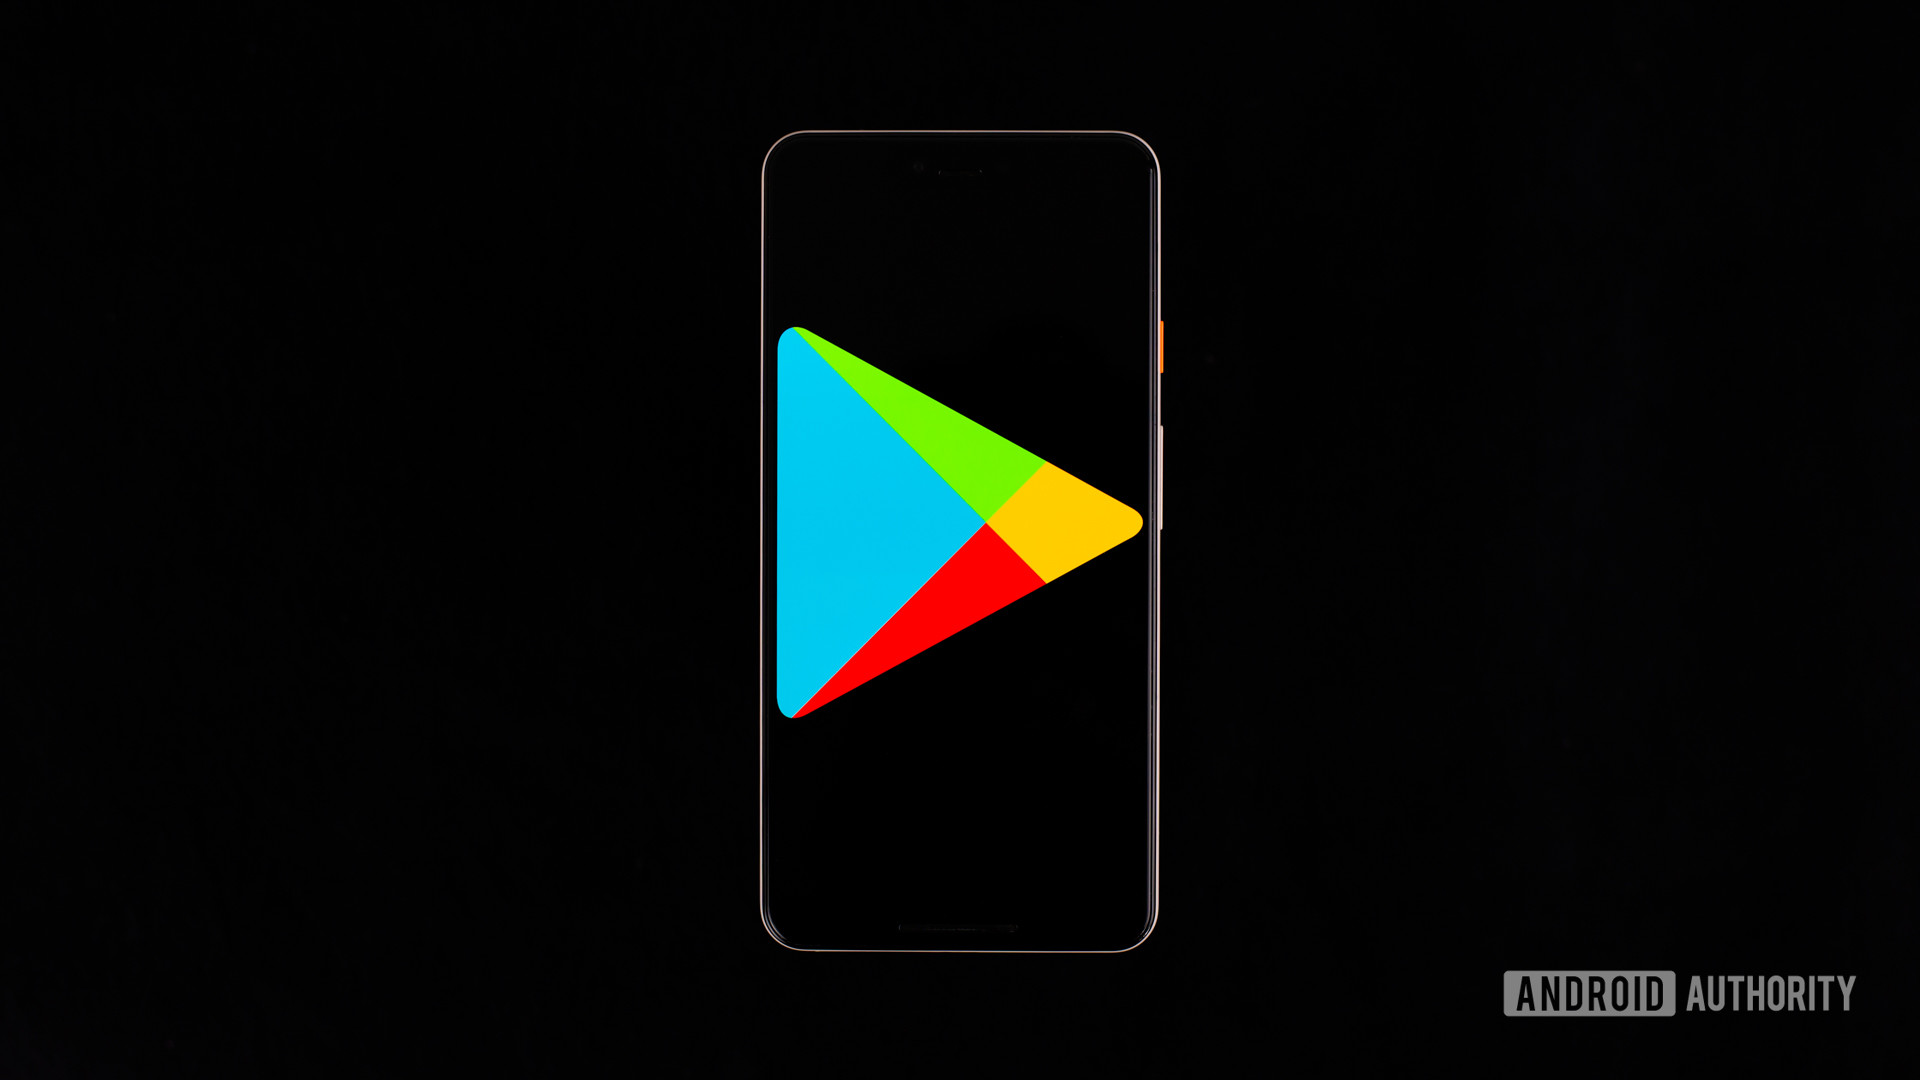 Google Play Store on smartphone stock photo 1 - How to back up android